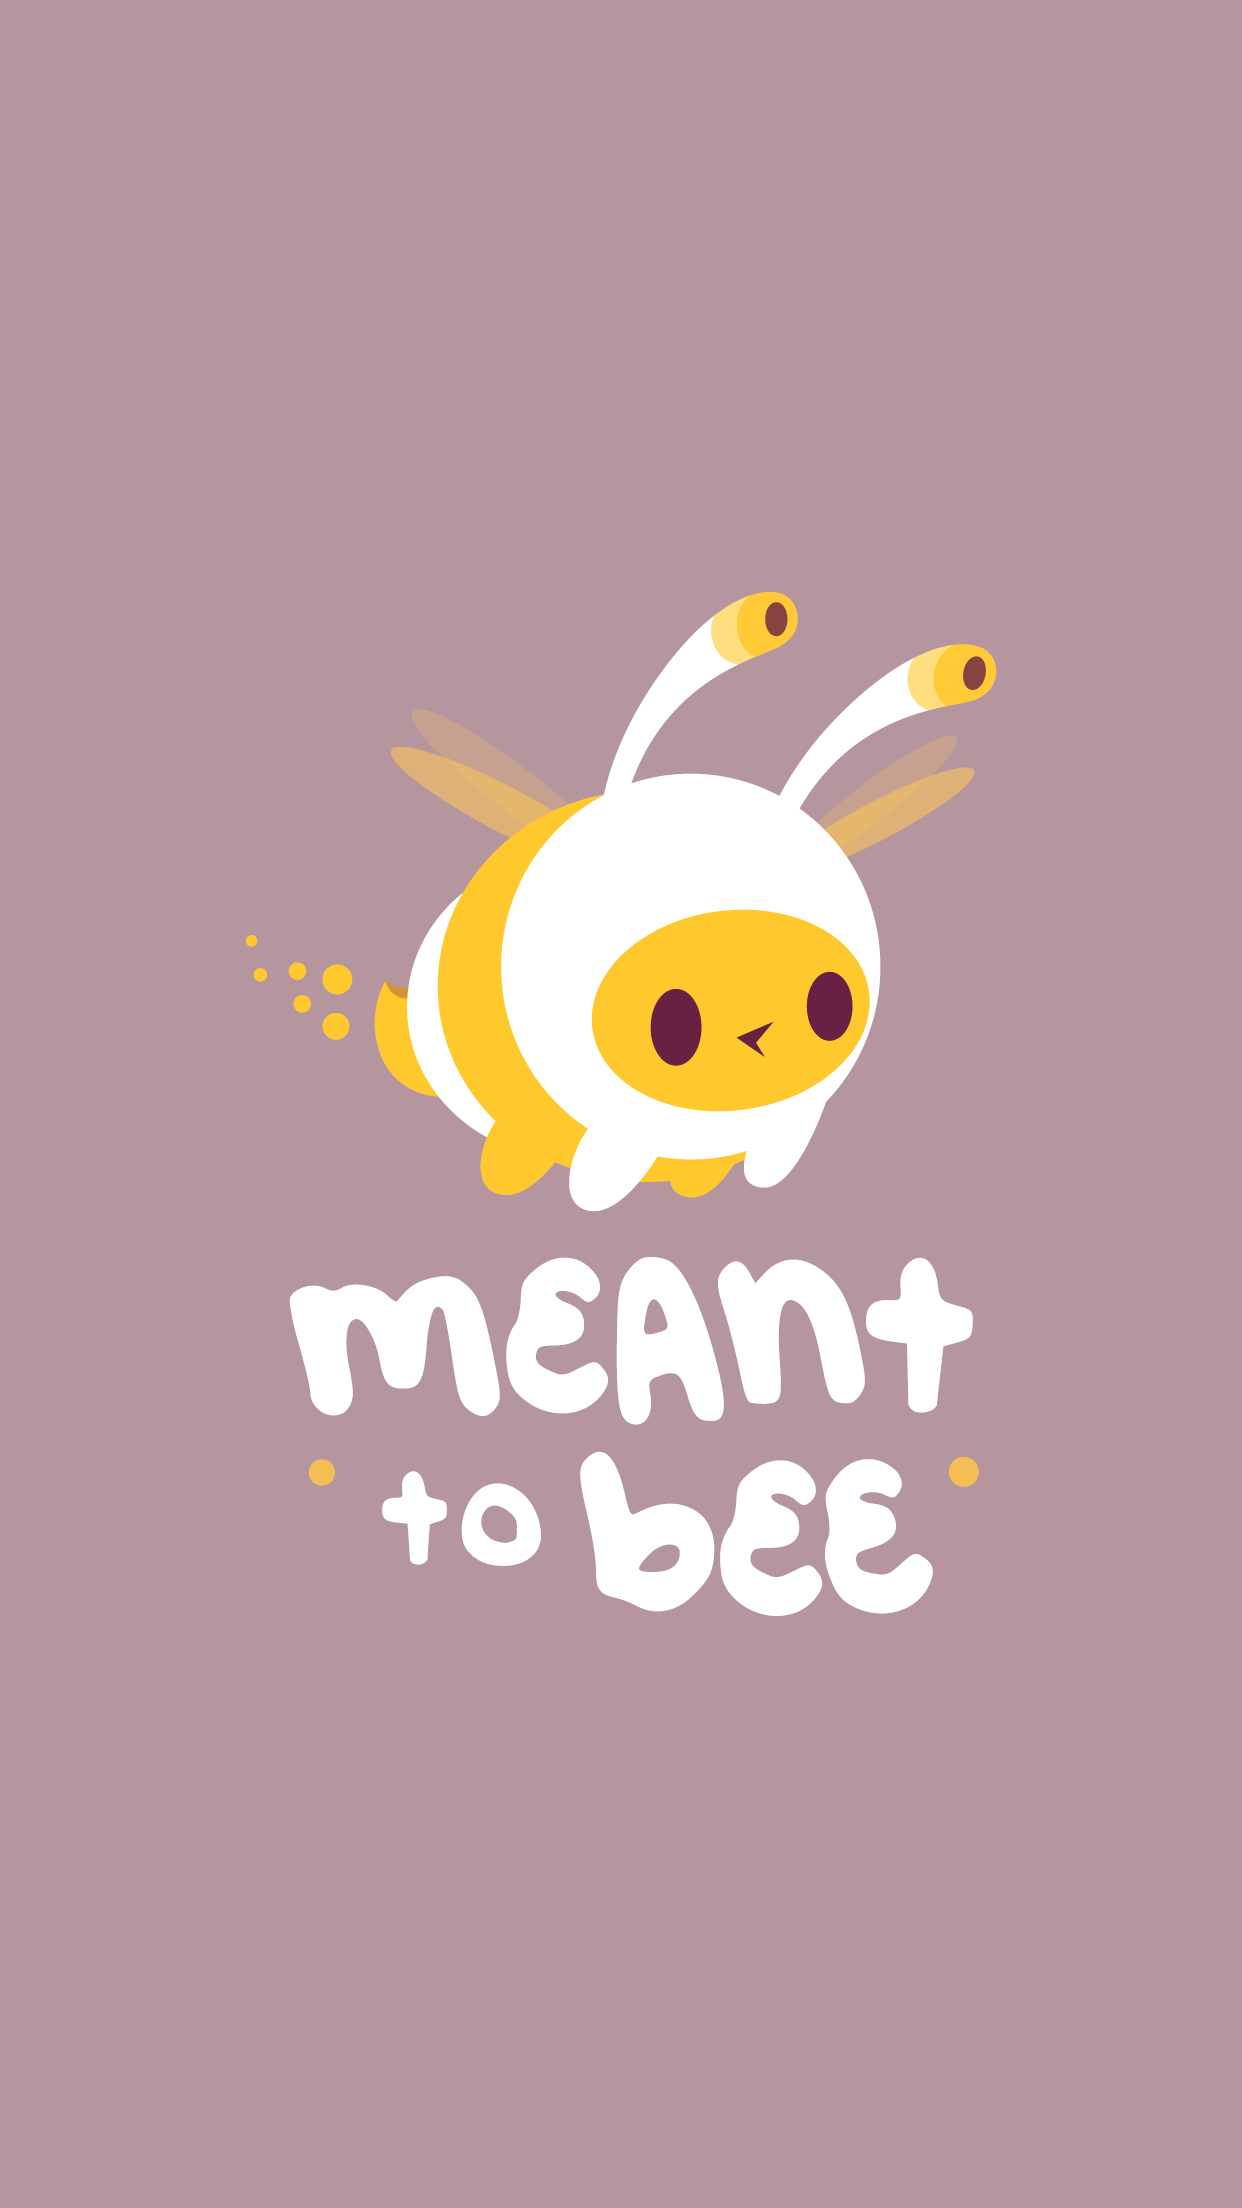 Meant to Bee（Unreleased）游戏截图